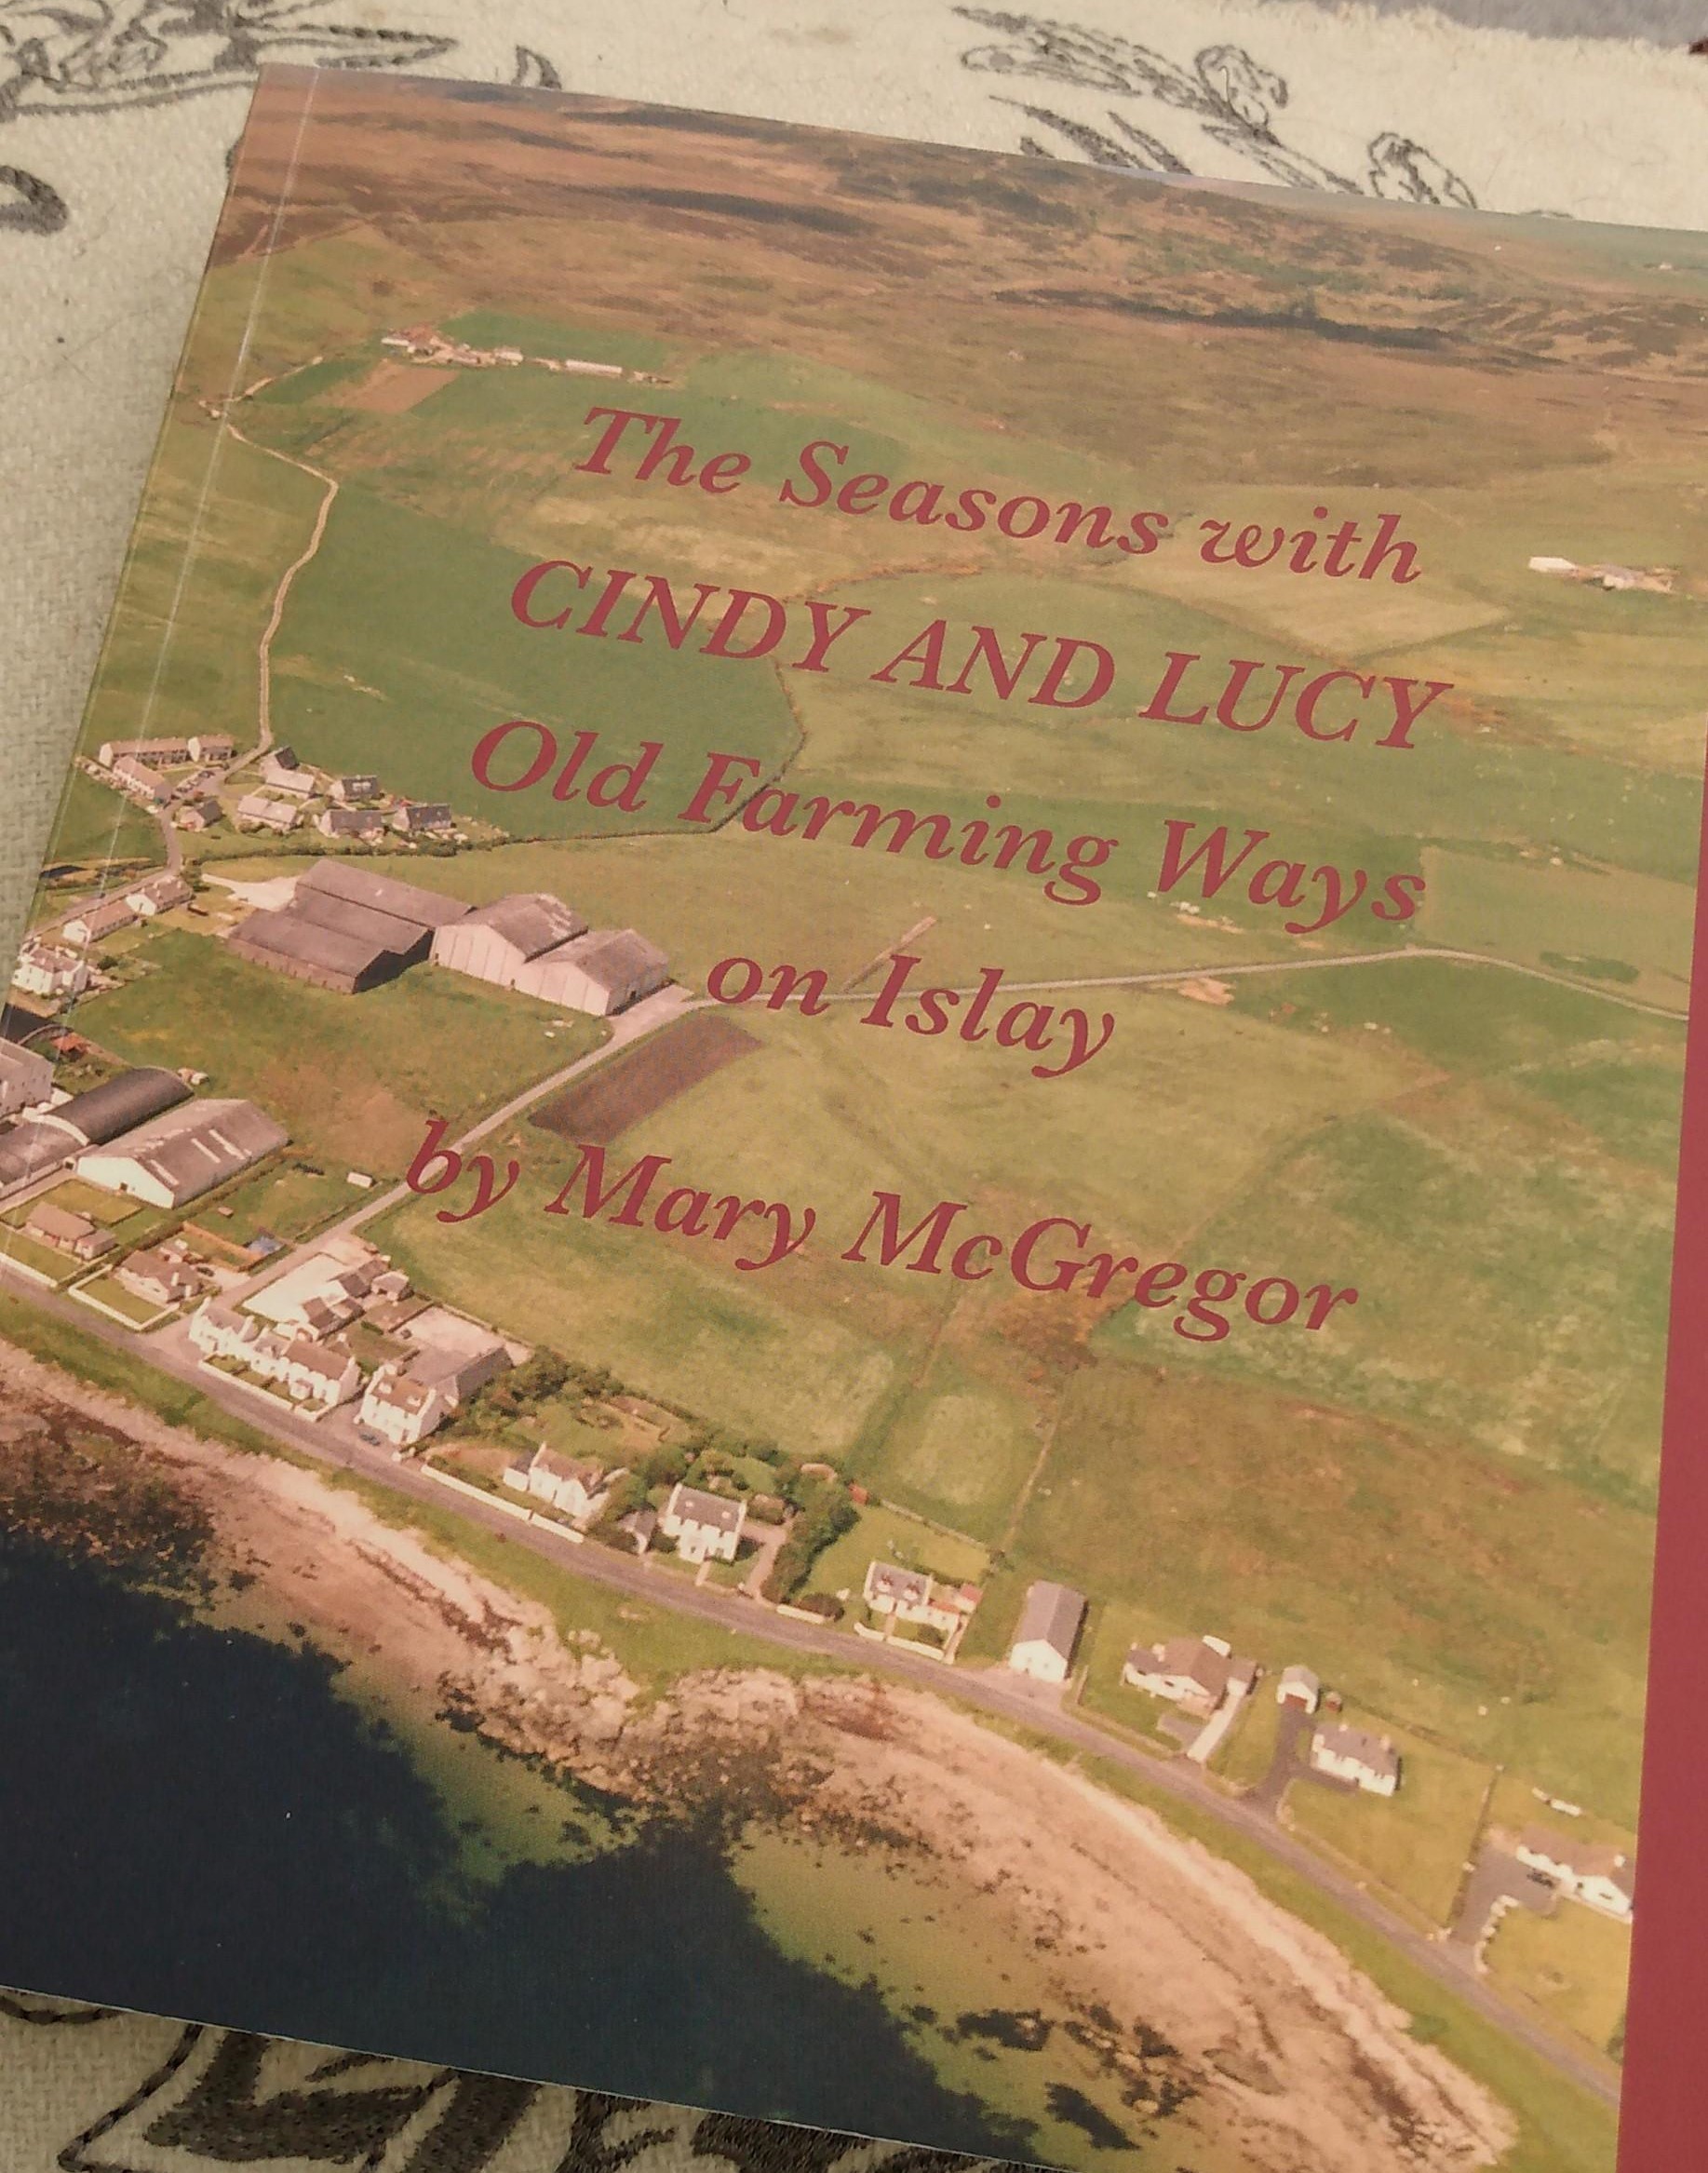 A trip through the decades with Mary McGregor in The seasons with Cindy and Lucy - Old farming ways on Islay